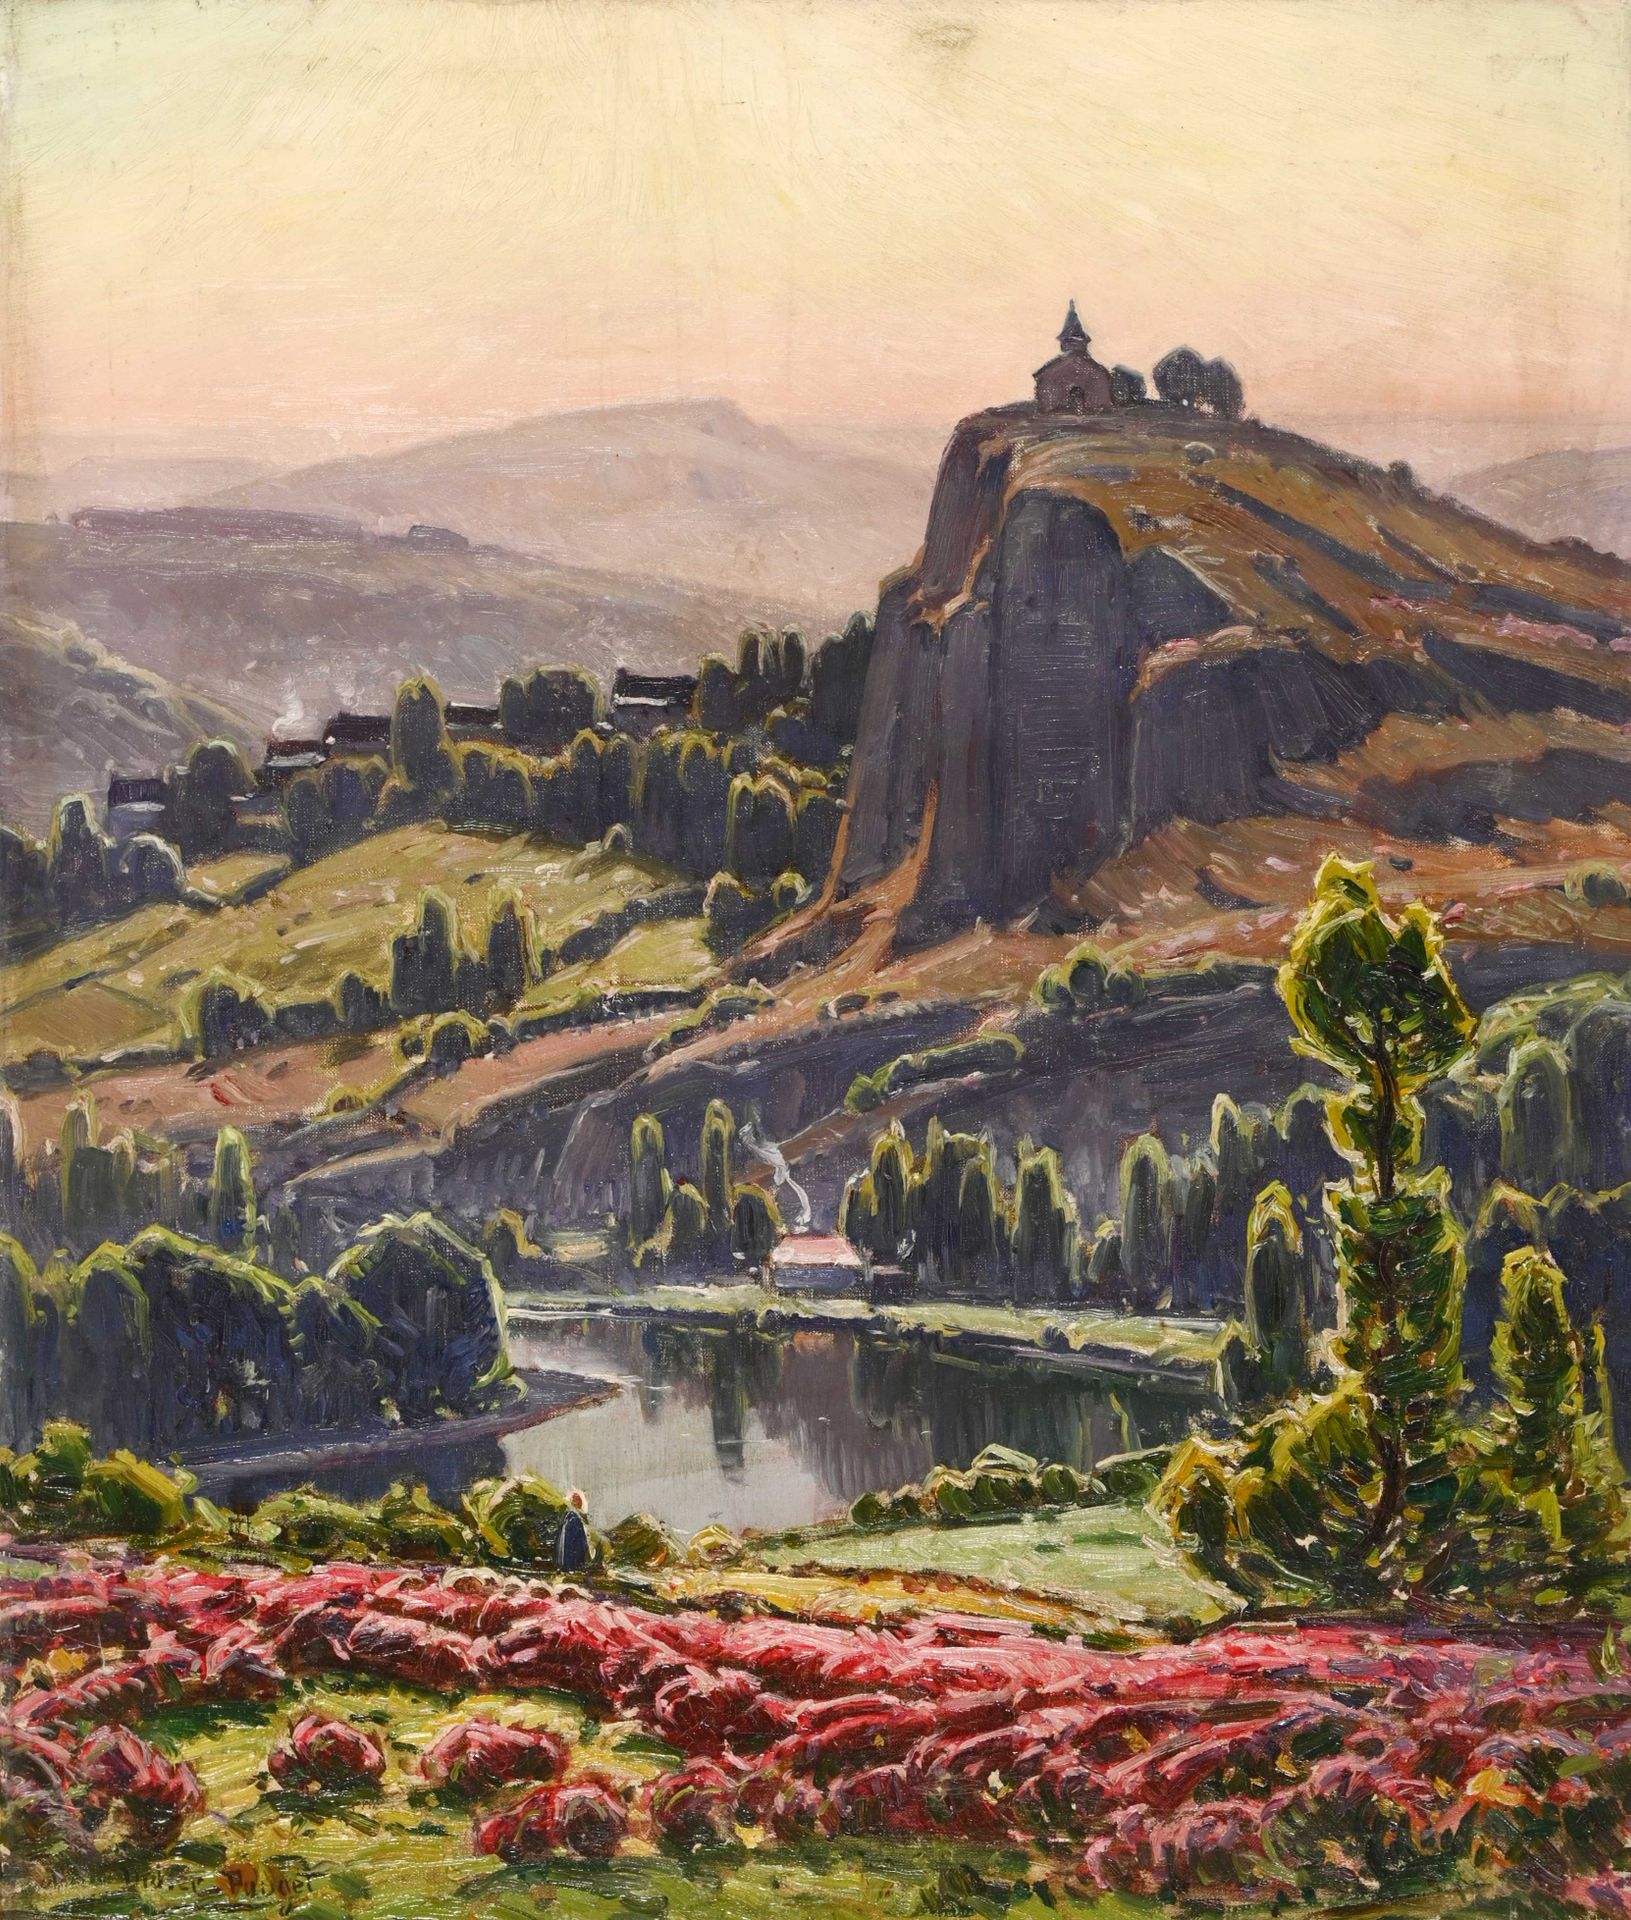 Null William DIDIER-POUGET (1864-1959) "Valley of the Aveyron" hst sbg 55x45